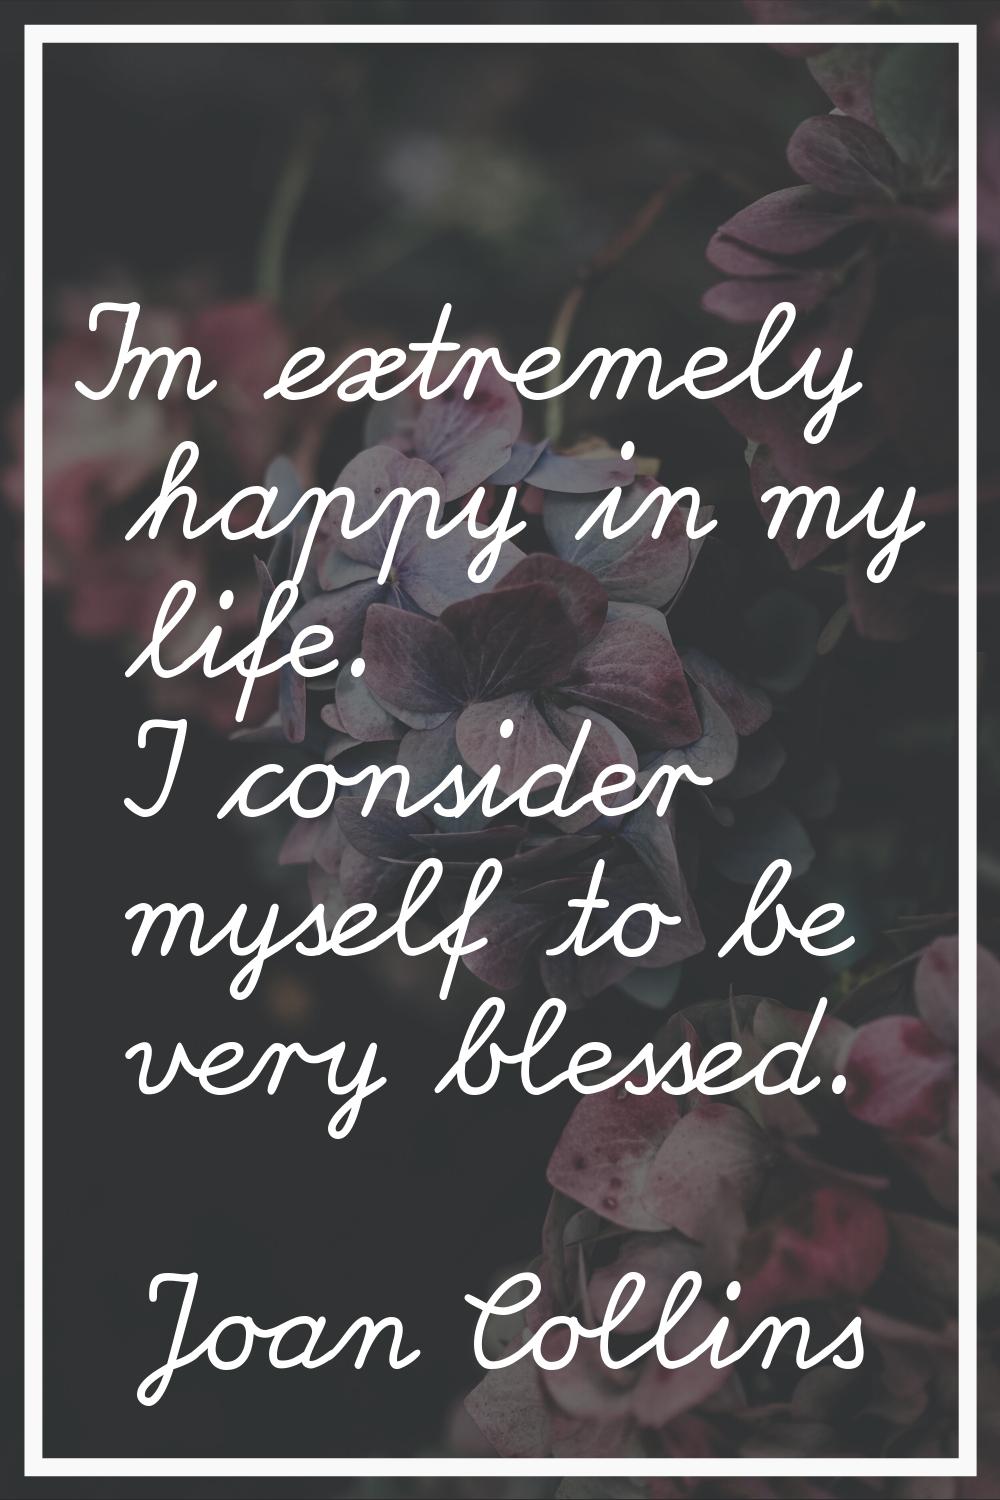 I'm extremely happy in my life. I consider myself to be very blessed.